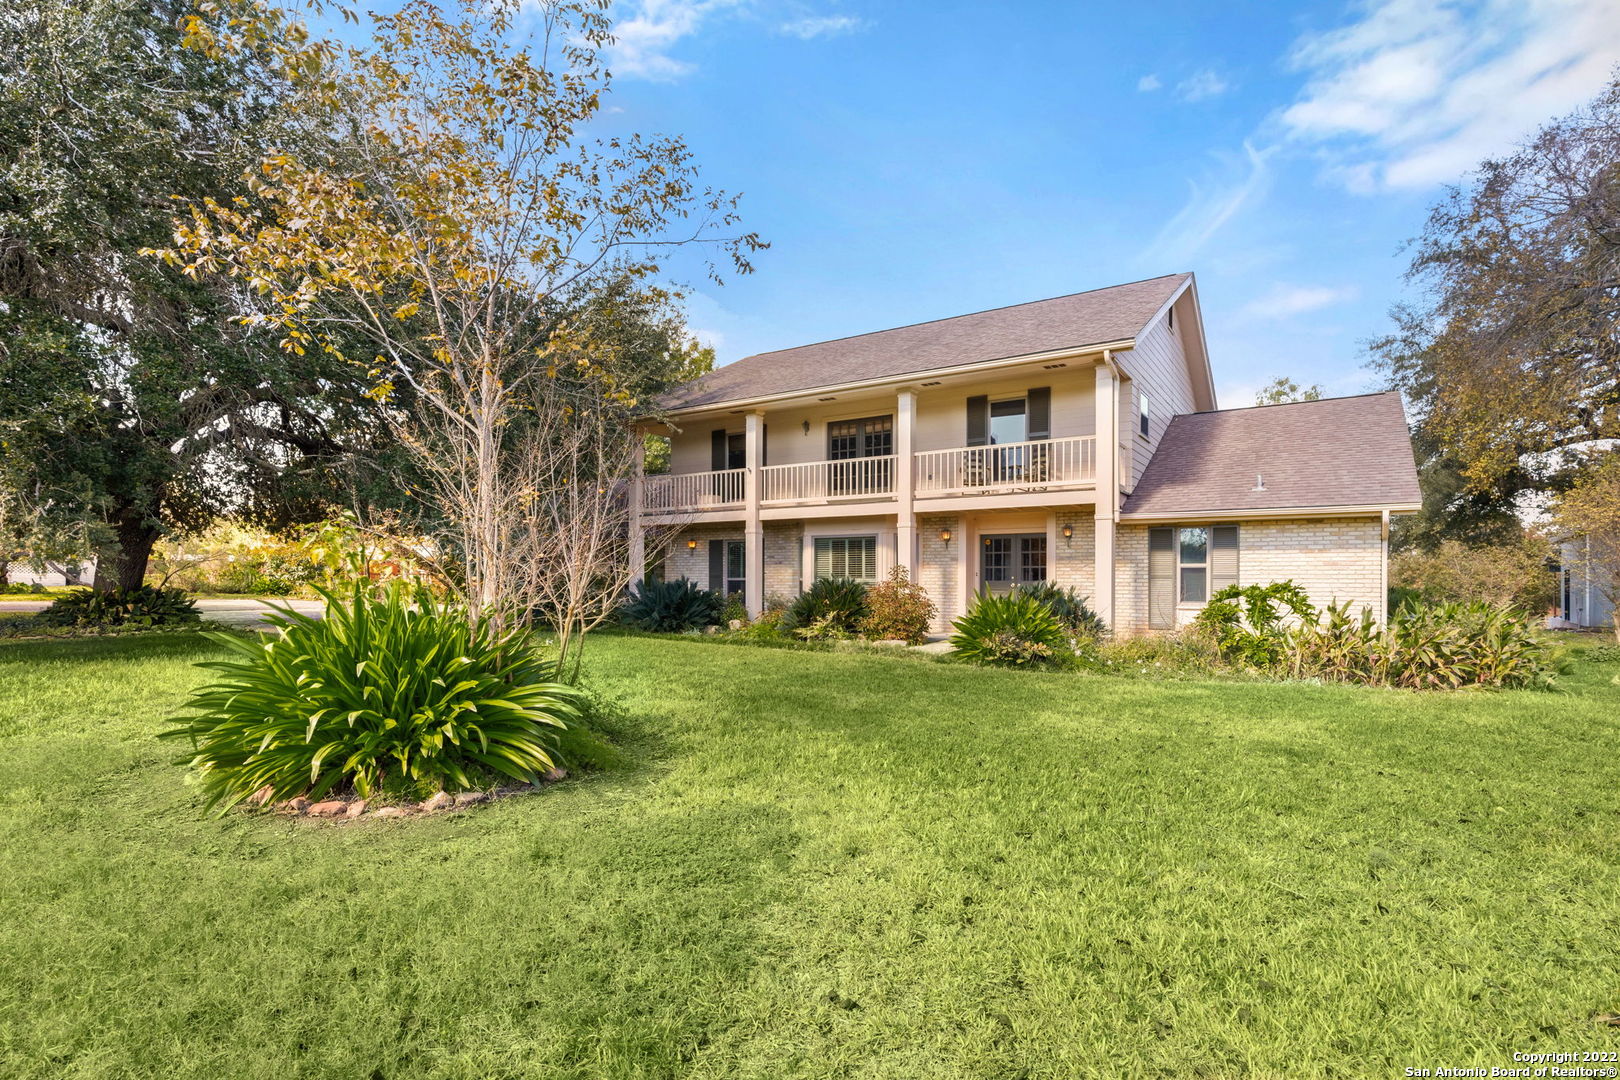 This beautiful river-front home in Seguin offers 4 bedrooms, 3 1/2 baths, and a large 2 car garage.  The 3098 sq ft, two-story home sits on 1.9 acres with 213 ft of river-front on Lake Seguin. The master bedroom is on the first floor, along with 2 living areas and 2 dining areas. The location offers quick access to local parks, golf and downtown. This section of river is part of the Texas Paddling Trail, perfect for kayaks, paddle-boards, and canoes.   Make your appointment to see it soon!